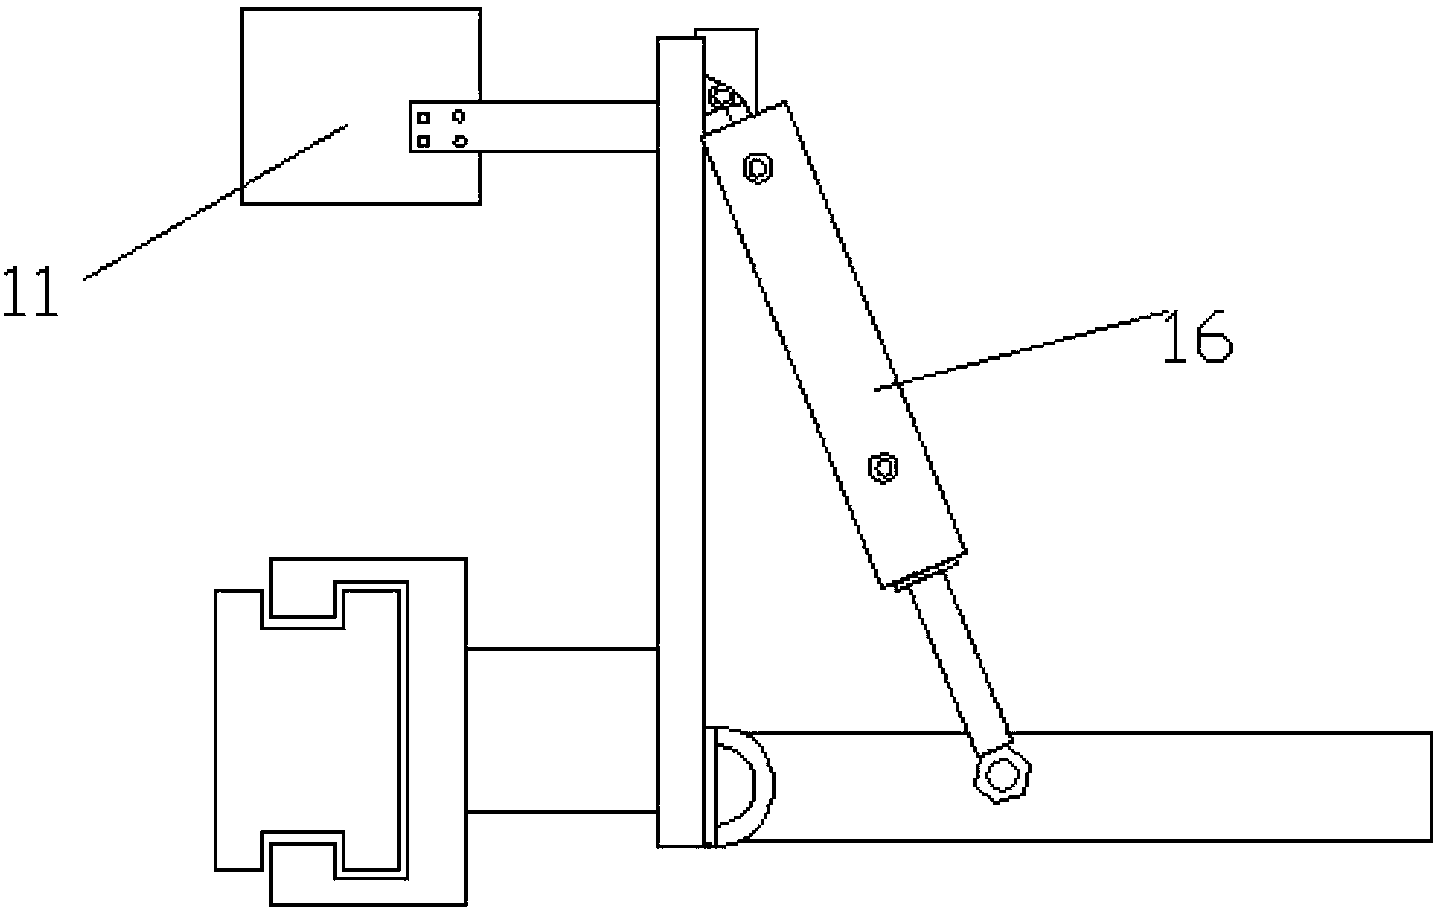 Integrated device with automatic box sealing and nailing functions